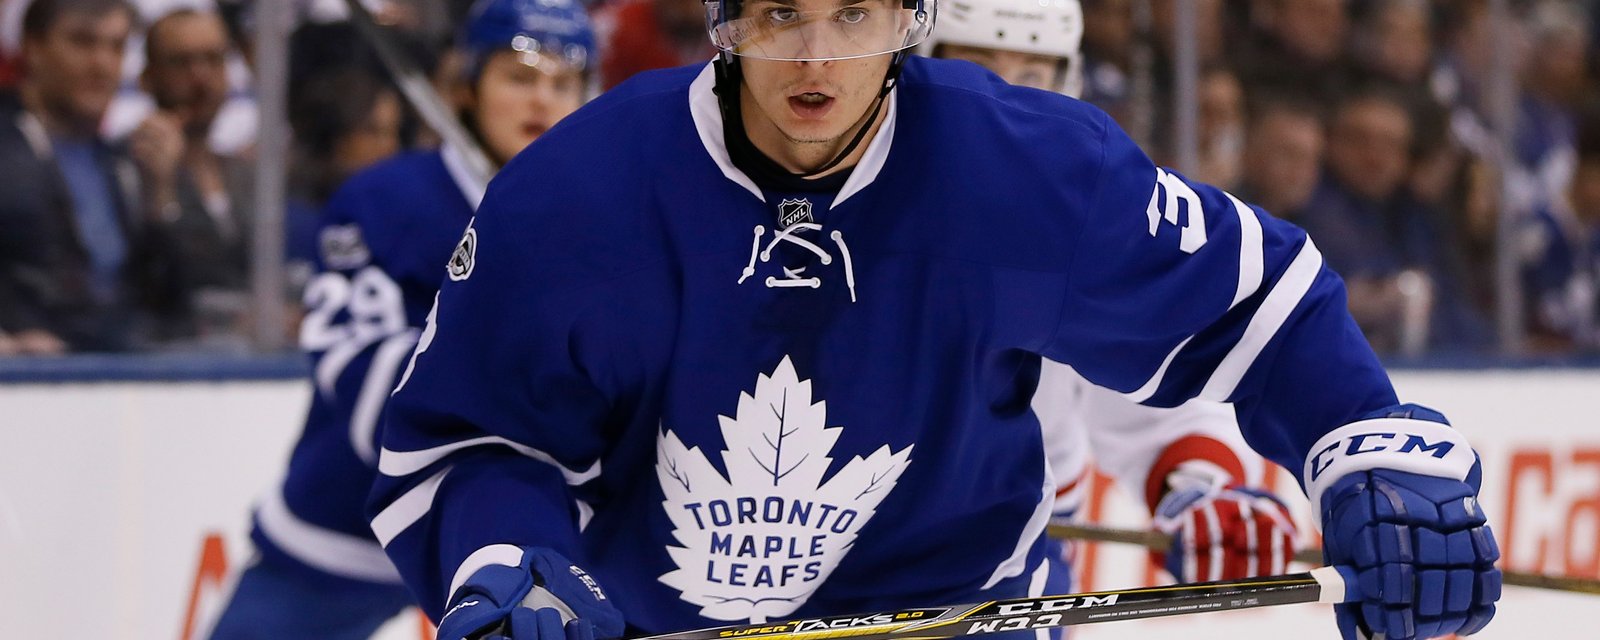 Former Leafs D-man Marchenko interested to return to NHL